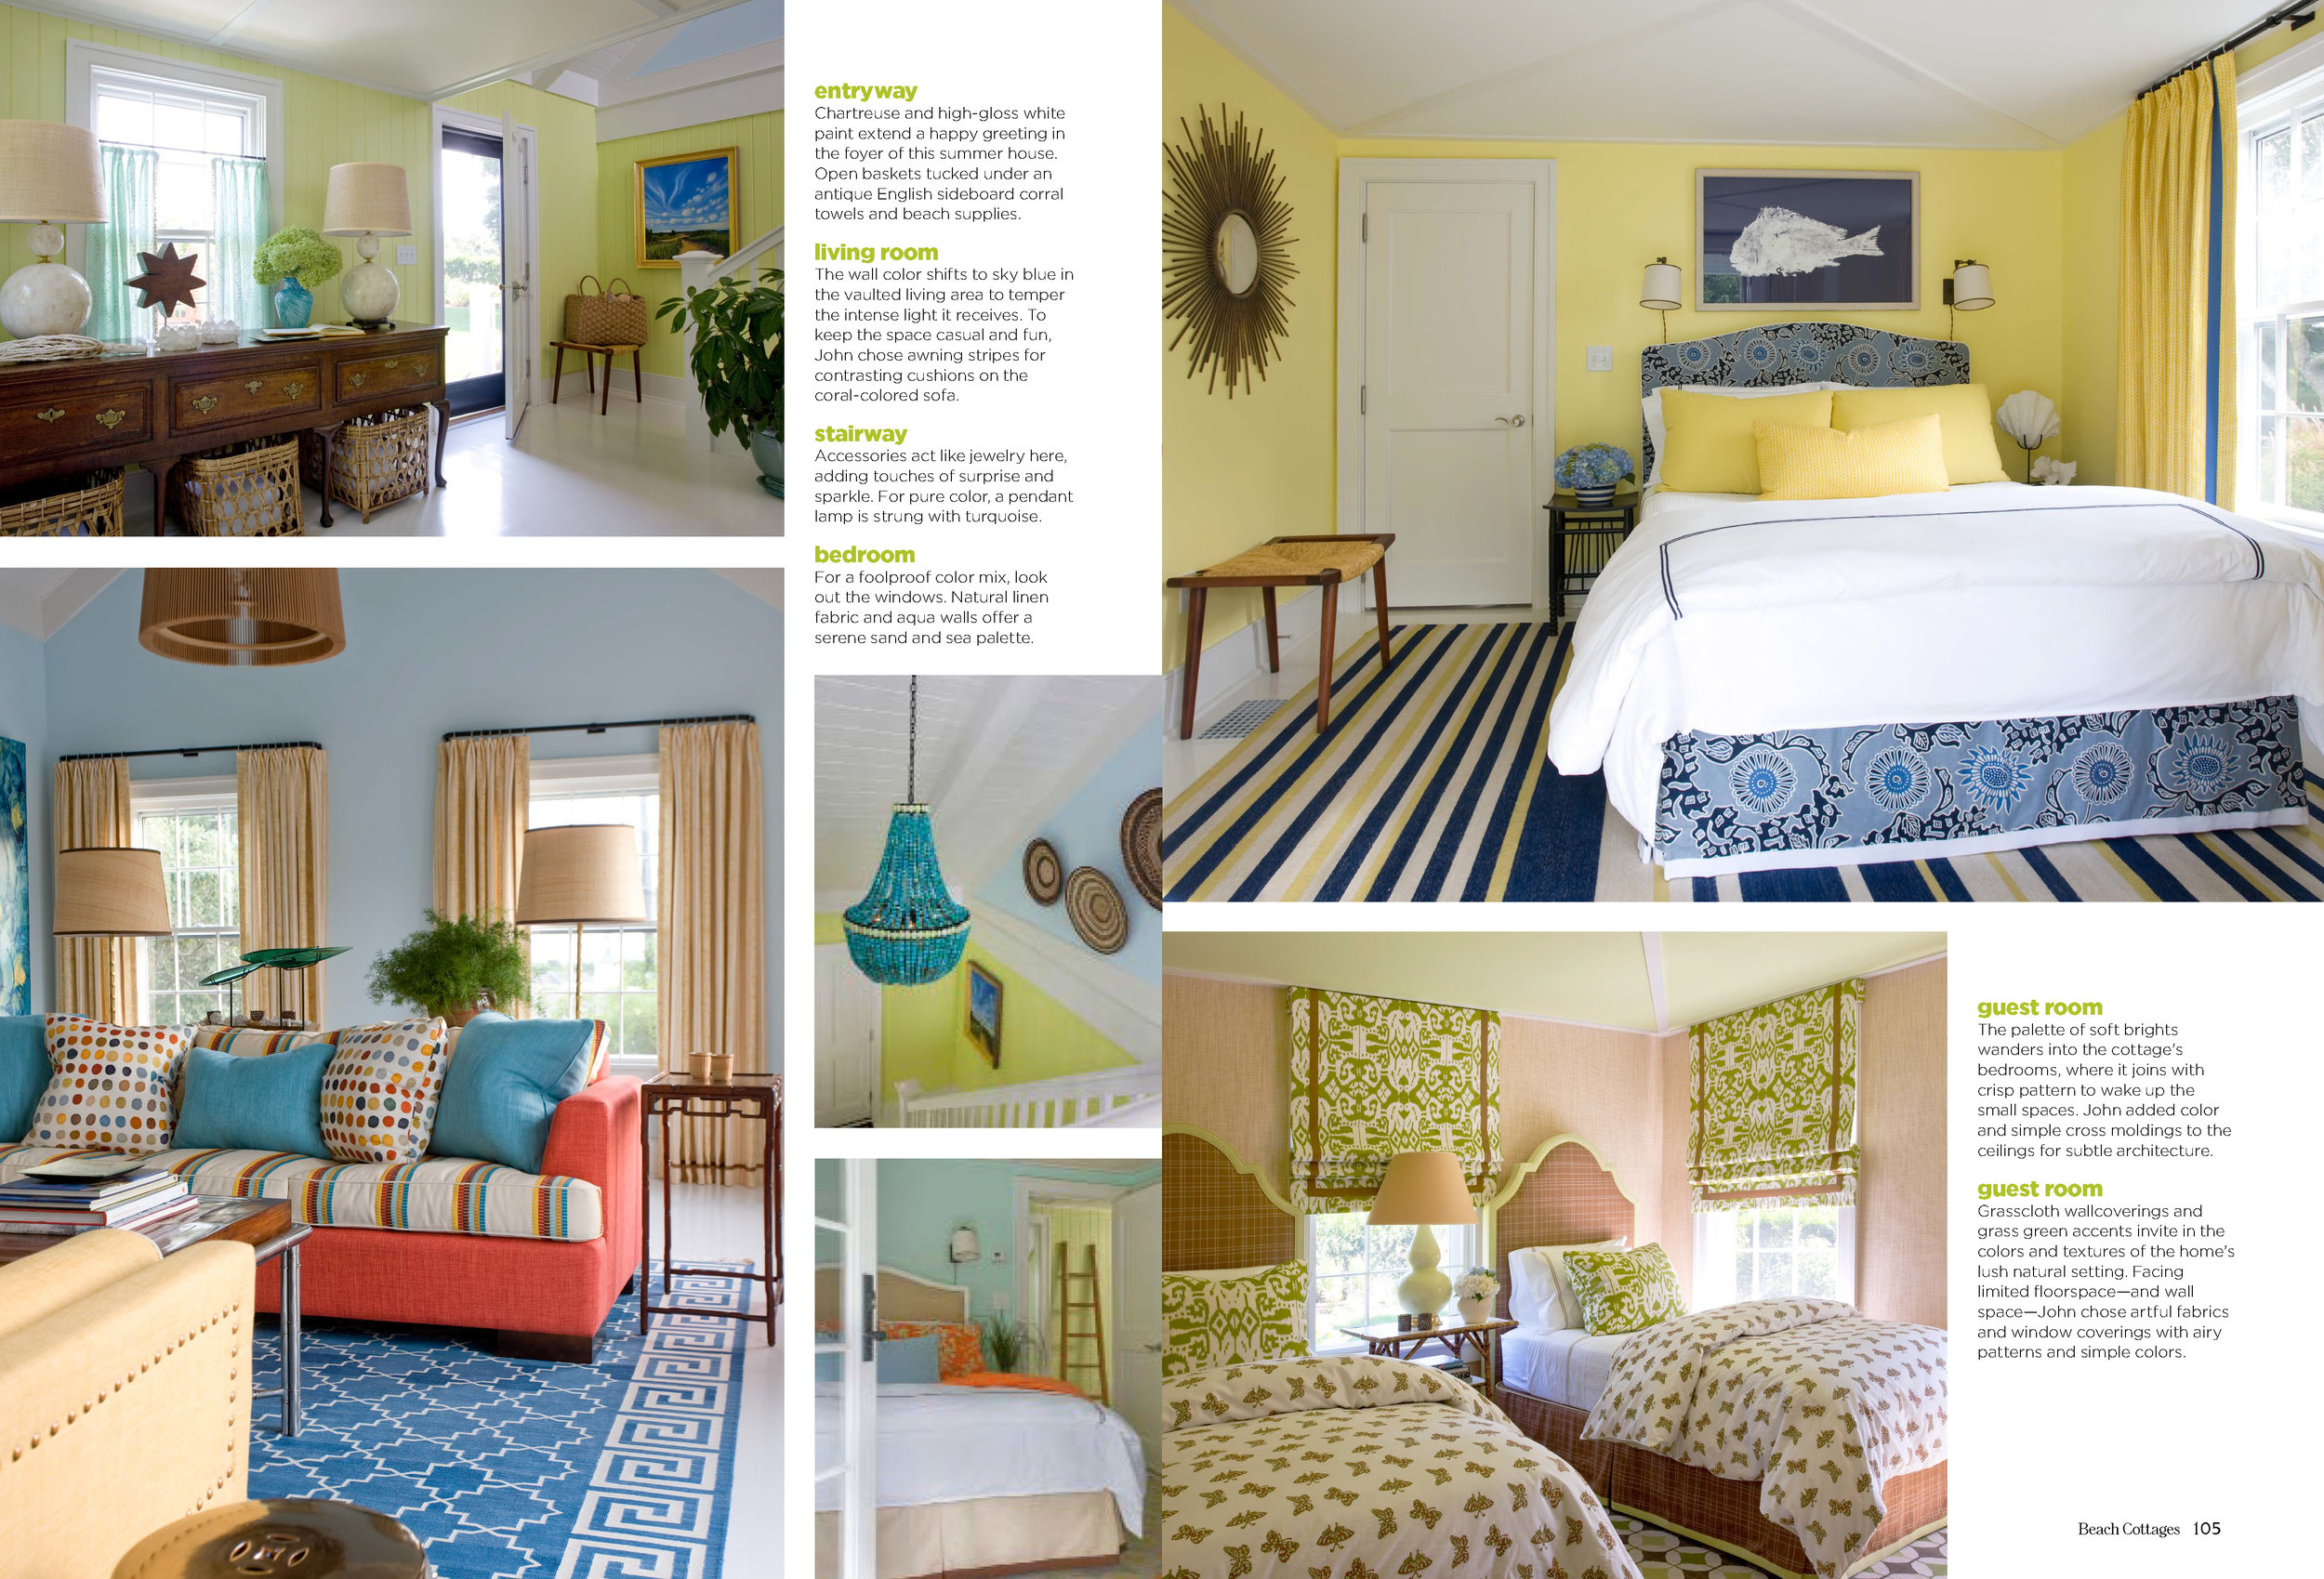 Beach Cottages 2015 - Article_Page_2.jpg